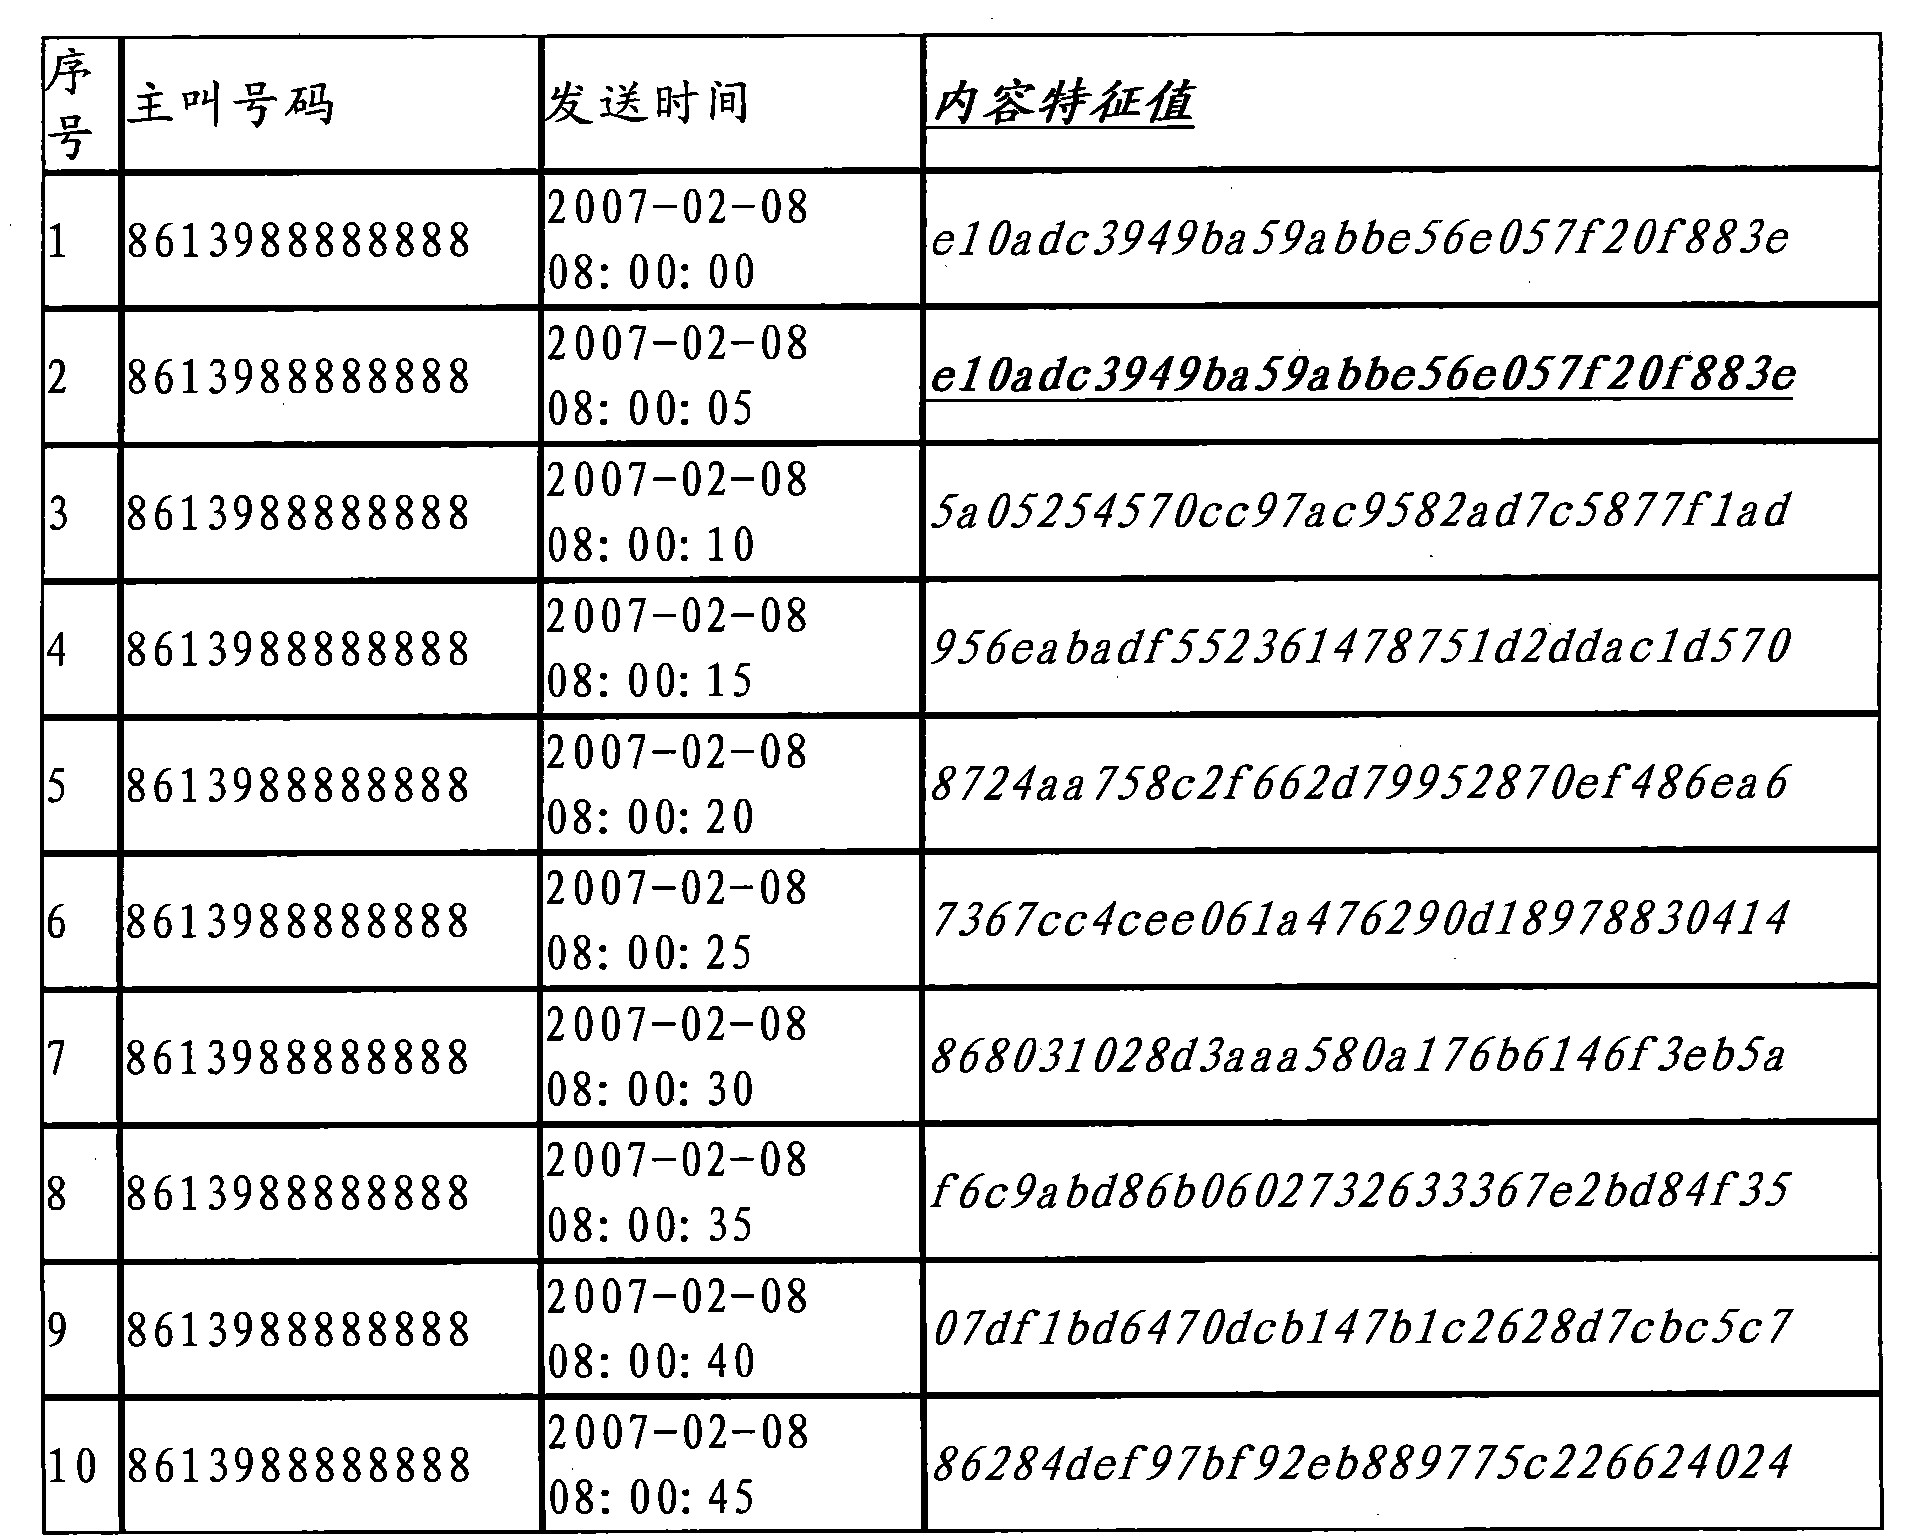 Method based on content similarity for improving recognition accuracy of spam message numbers